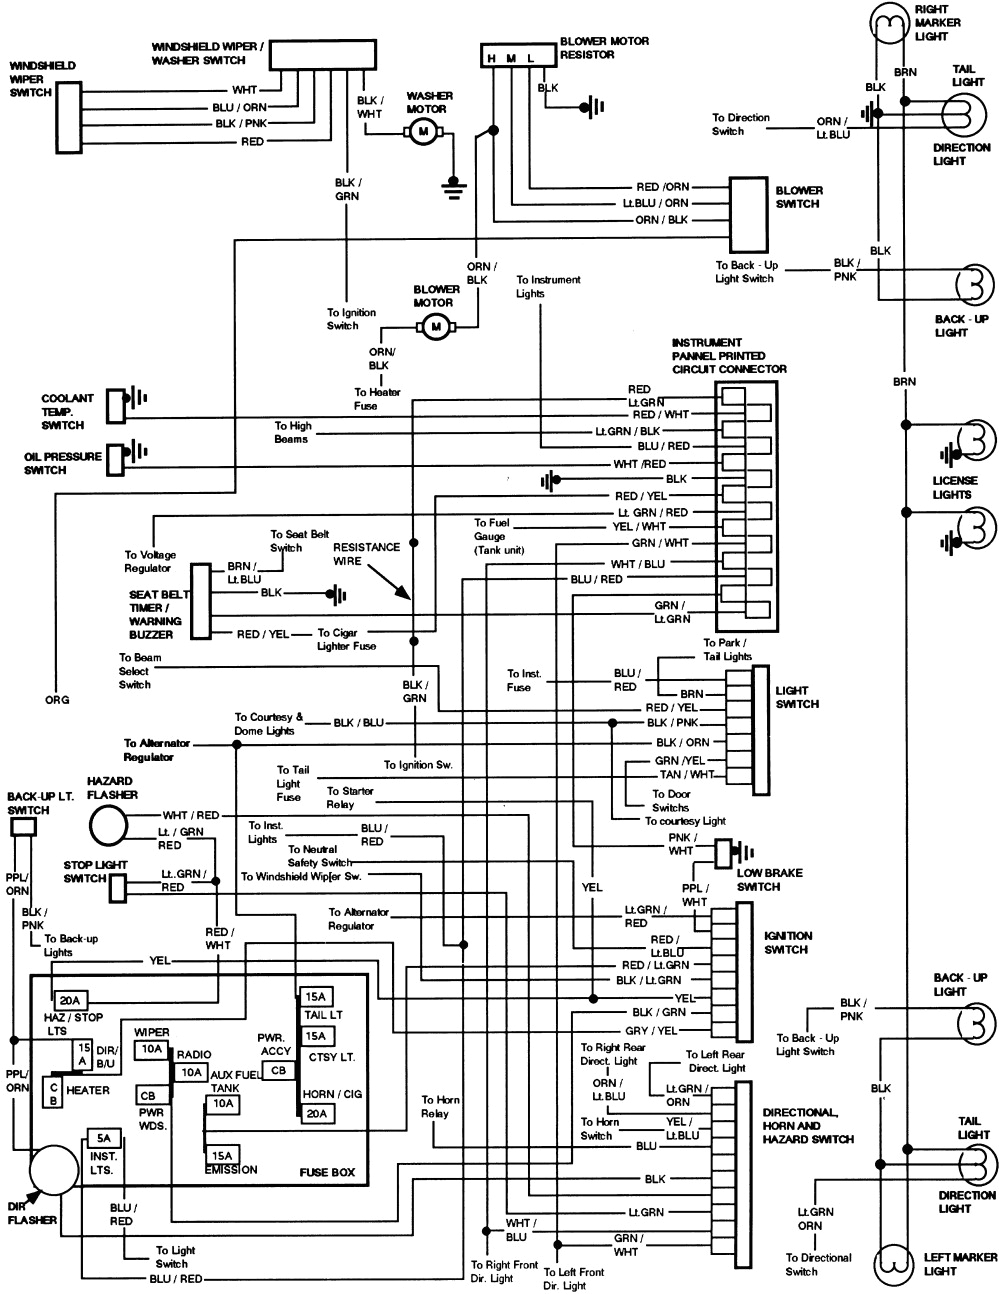 1991 f150 ignition system diagram data diagram schematic 1995 ford f 150 ignition system wiring